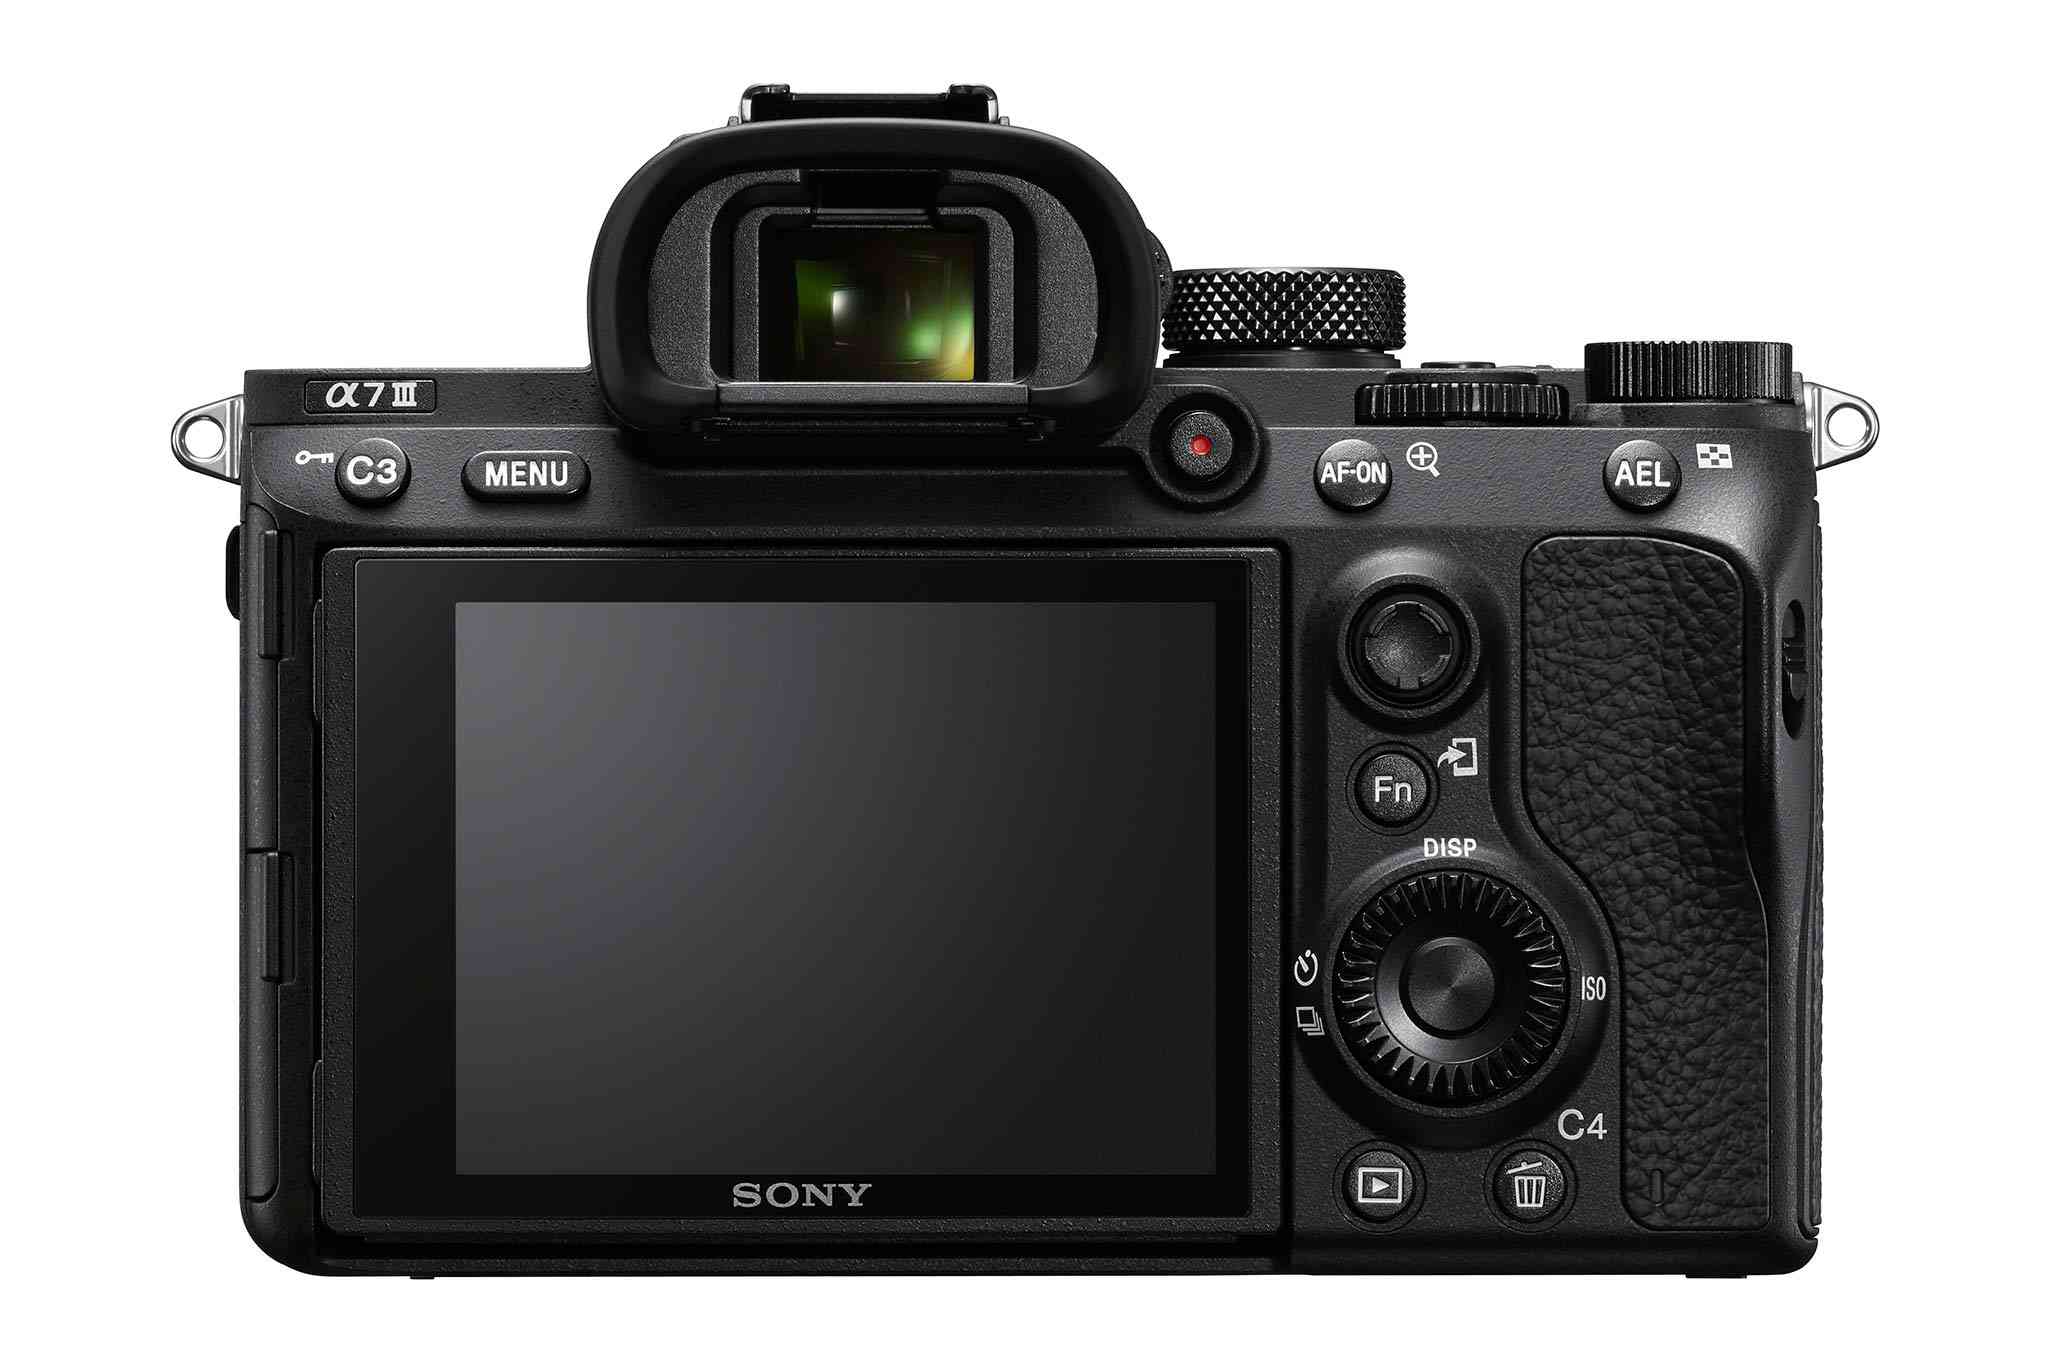 Sony a7 III features